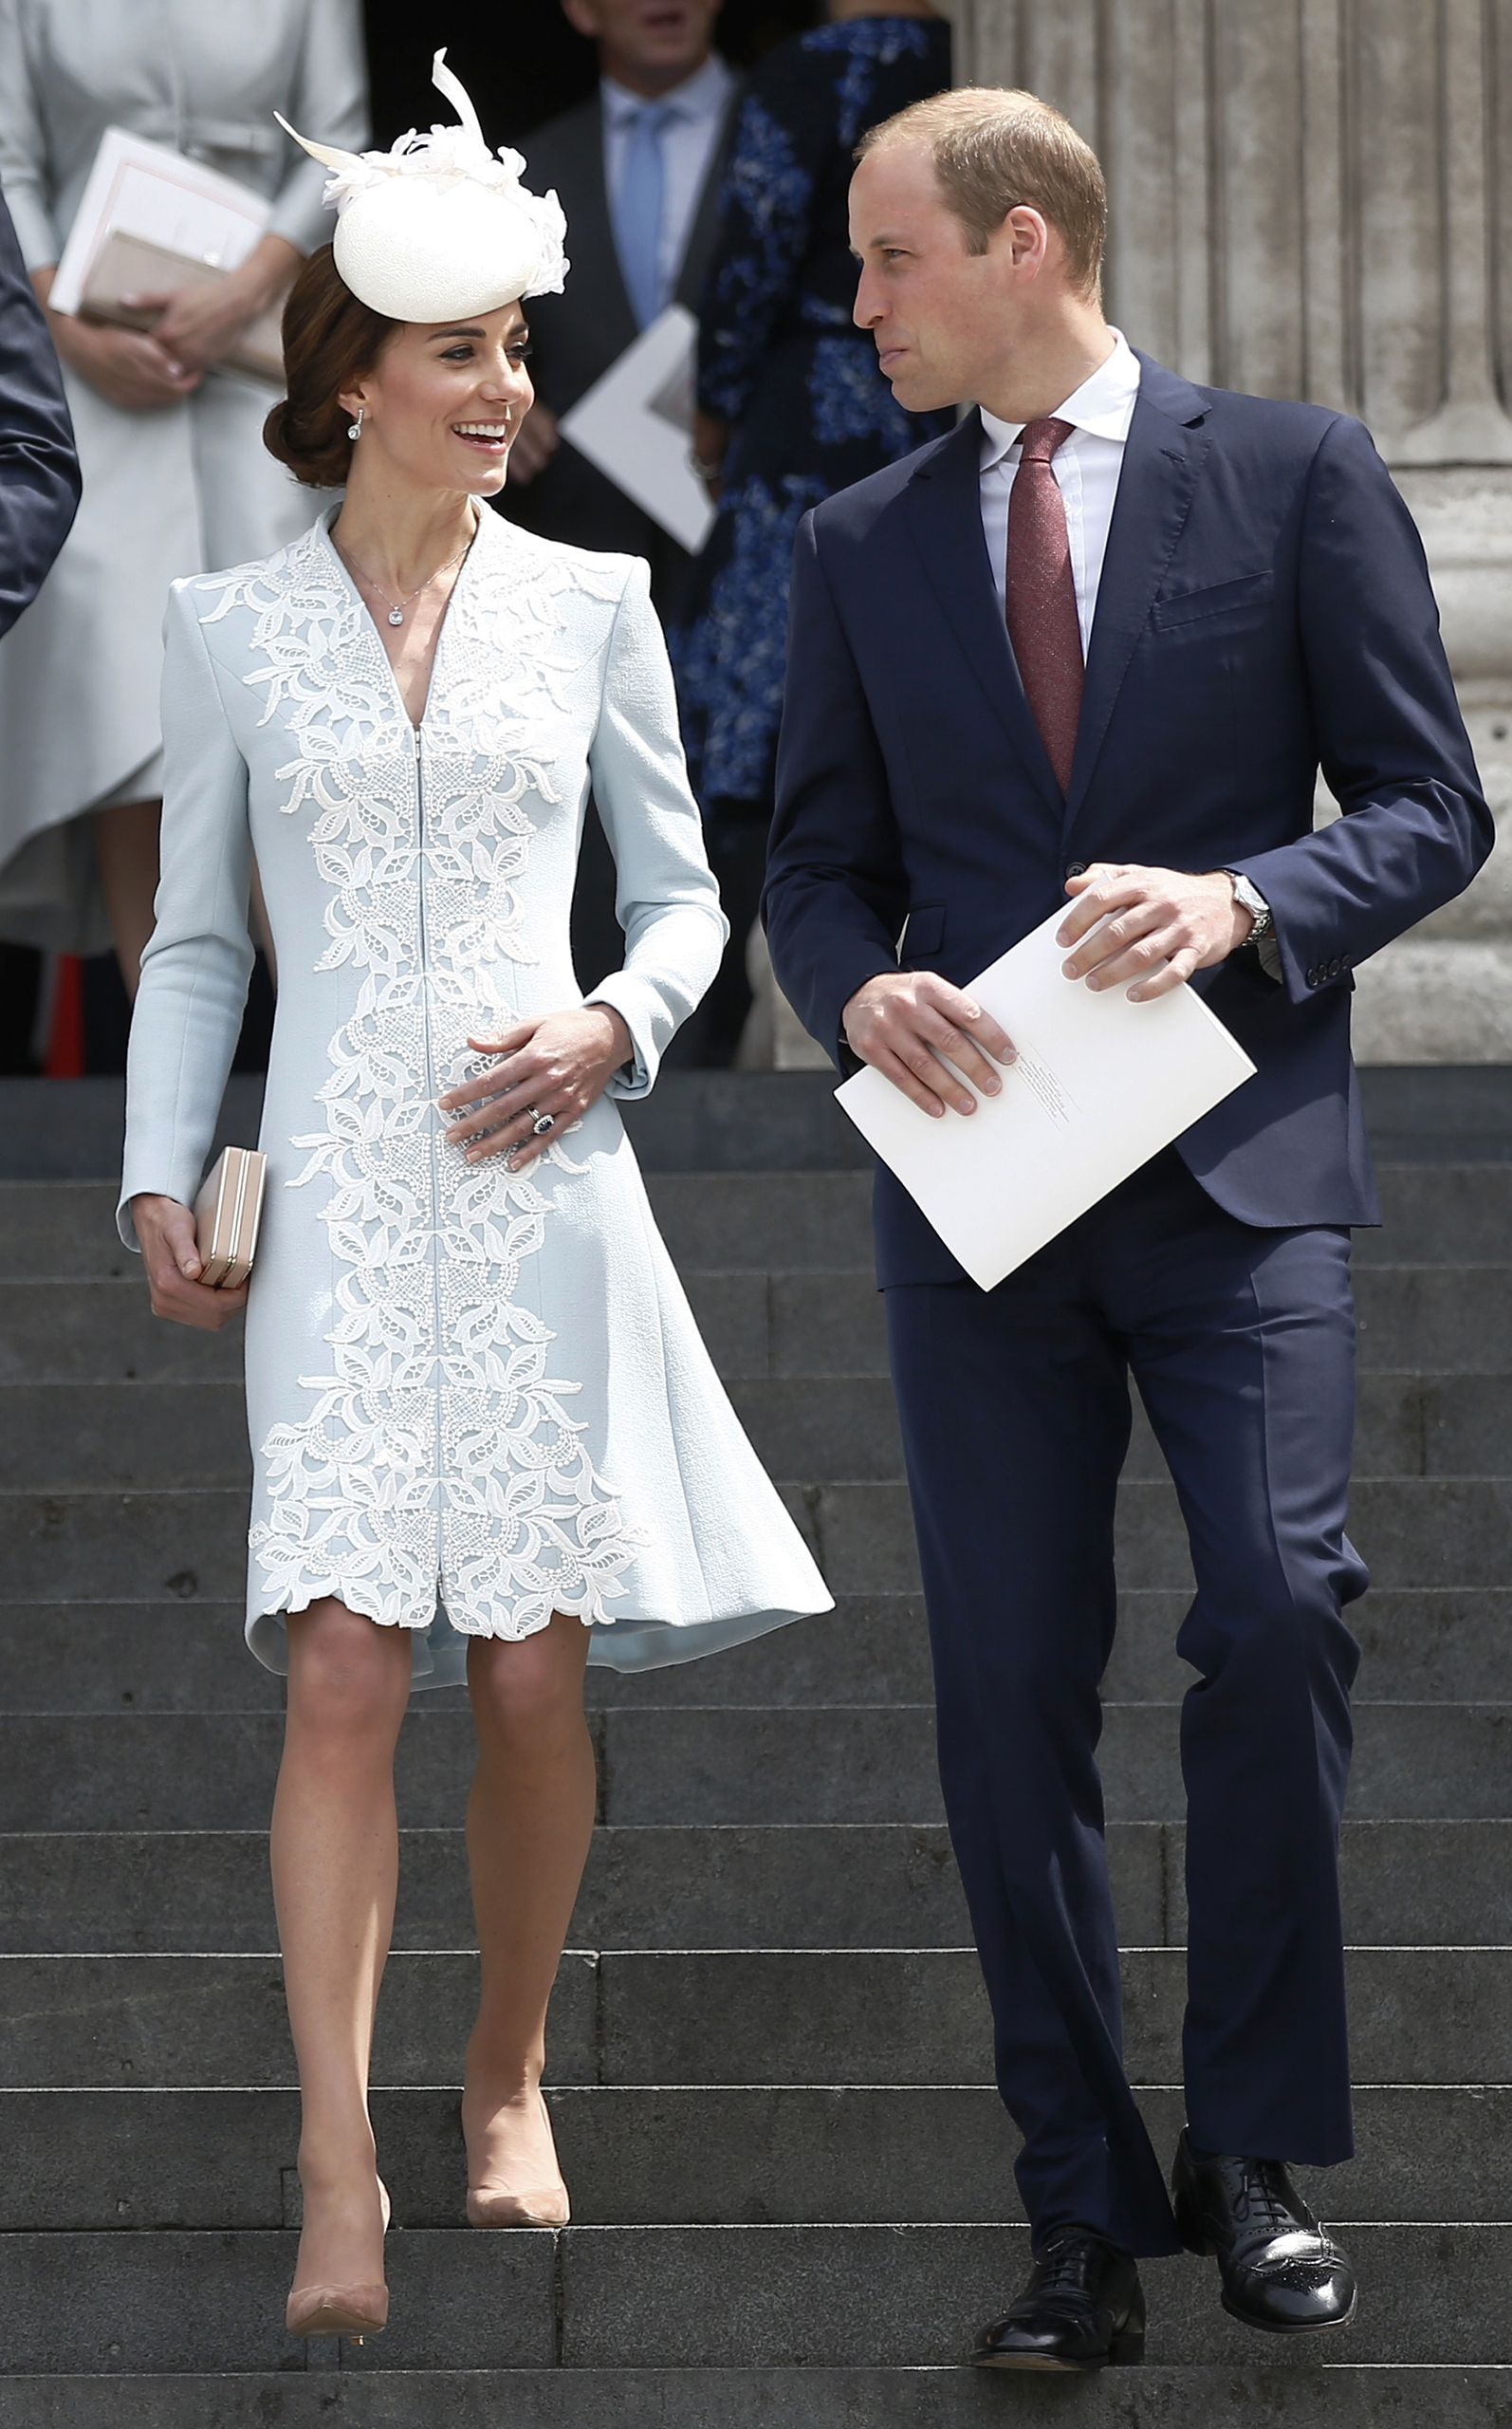 Britain's Prince William and Catherine, Duchess of Cambridge, leave after a service of thanksgiving for Queen Elizabeth's 90th birthday at St. Paul's Cathedral in London, June 10, 2016.